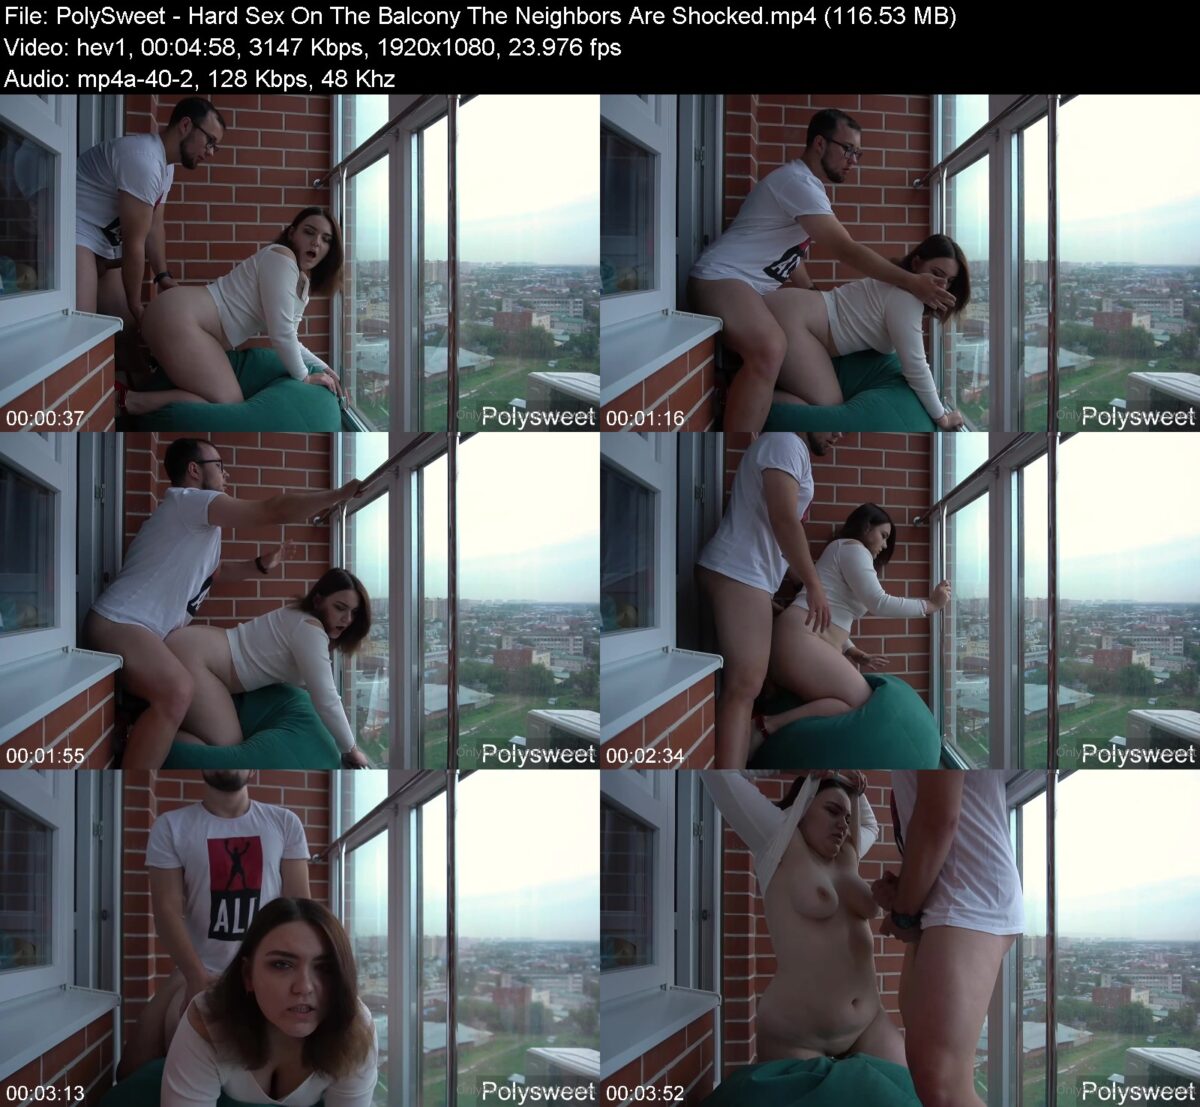 PolySweet in Hard Sex On The Balcony The Neighbors Are Shocked